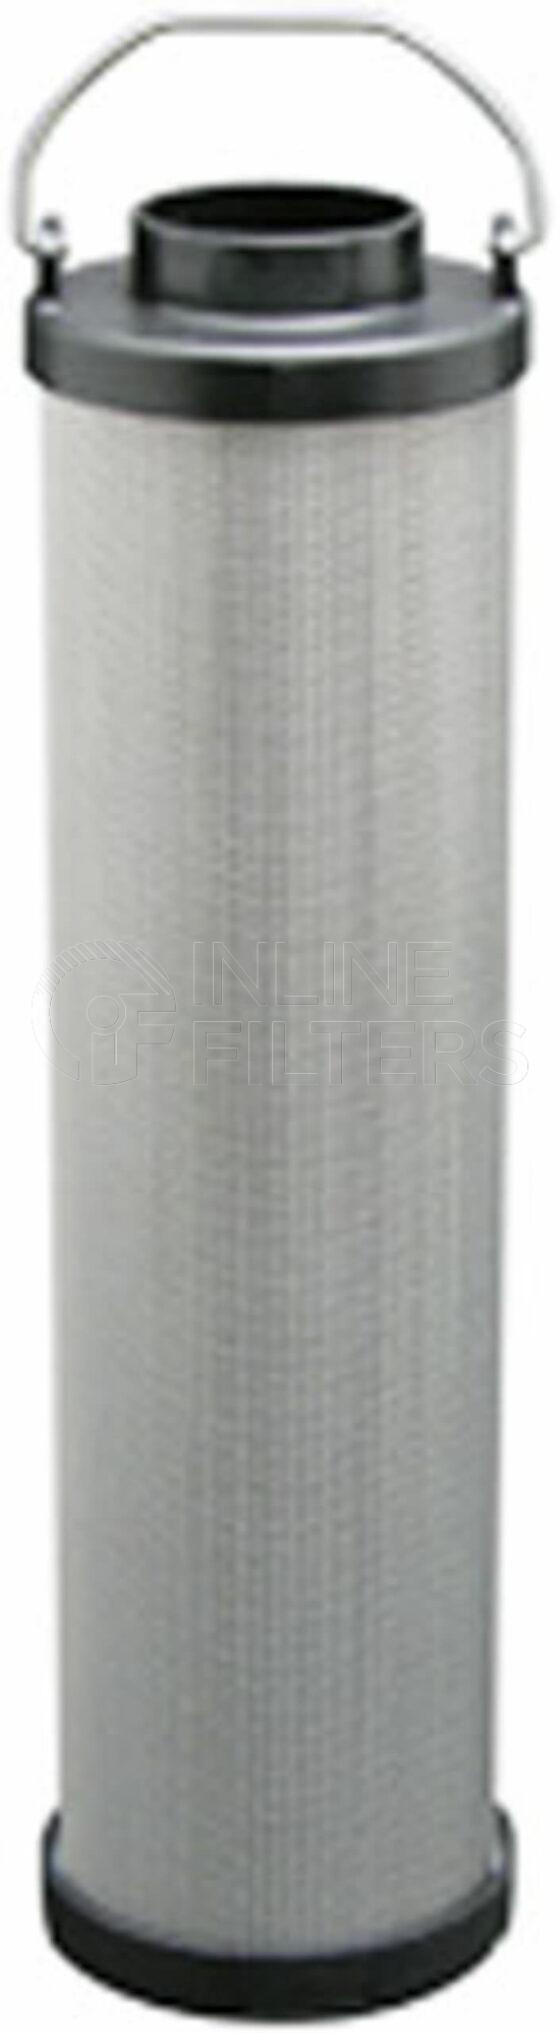 Inline FH51365. Hydraulic Filter Product – Cartridge – O- Ring Product Hydraulic filter product